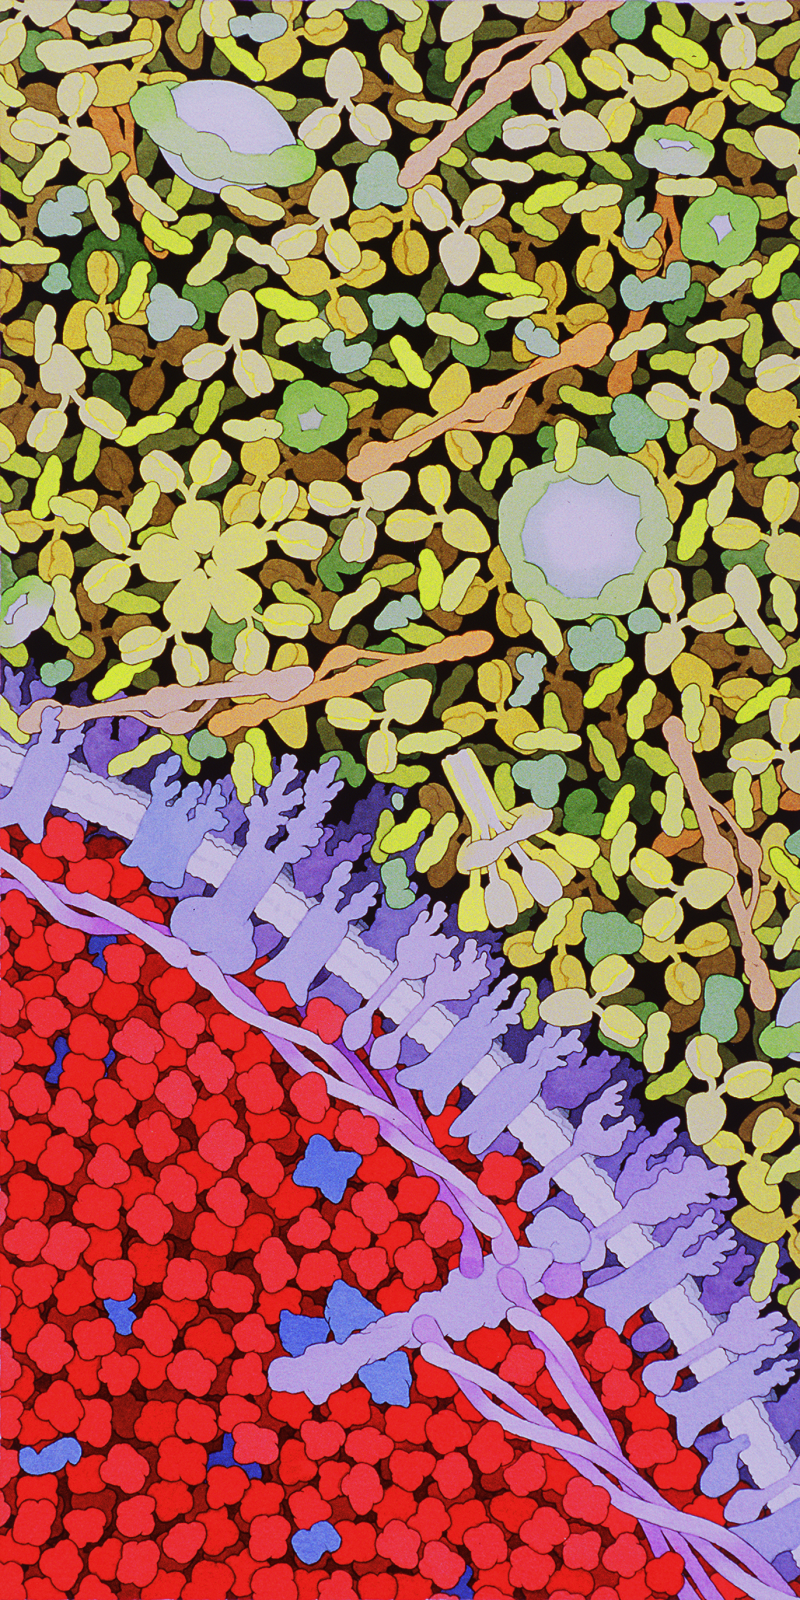 PDB-101: Goodsell Gallery: Blood